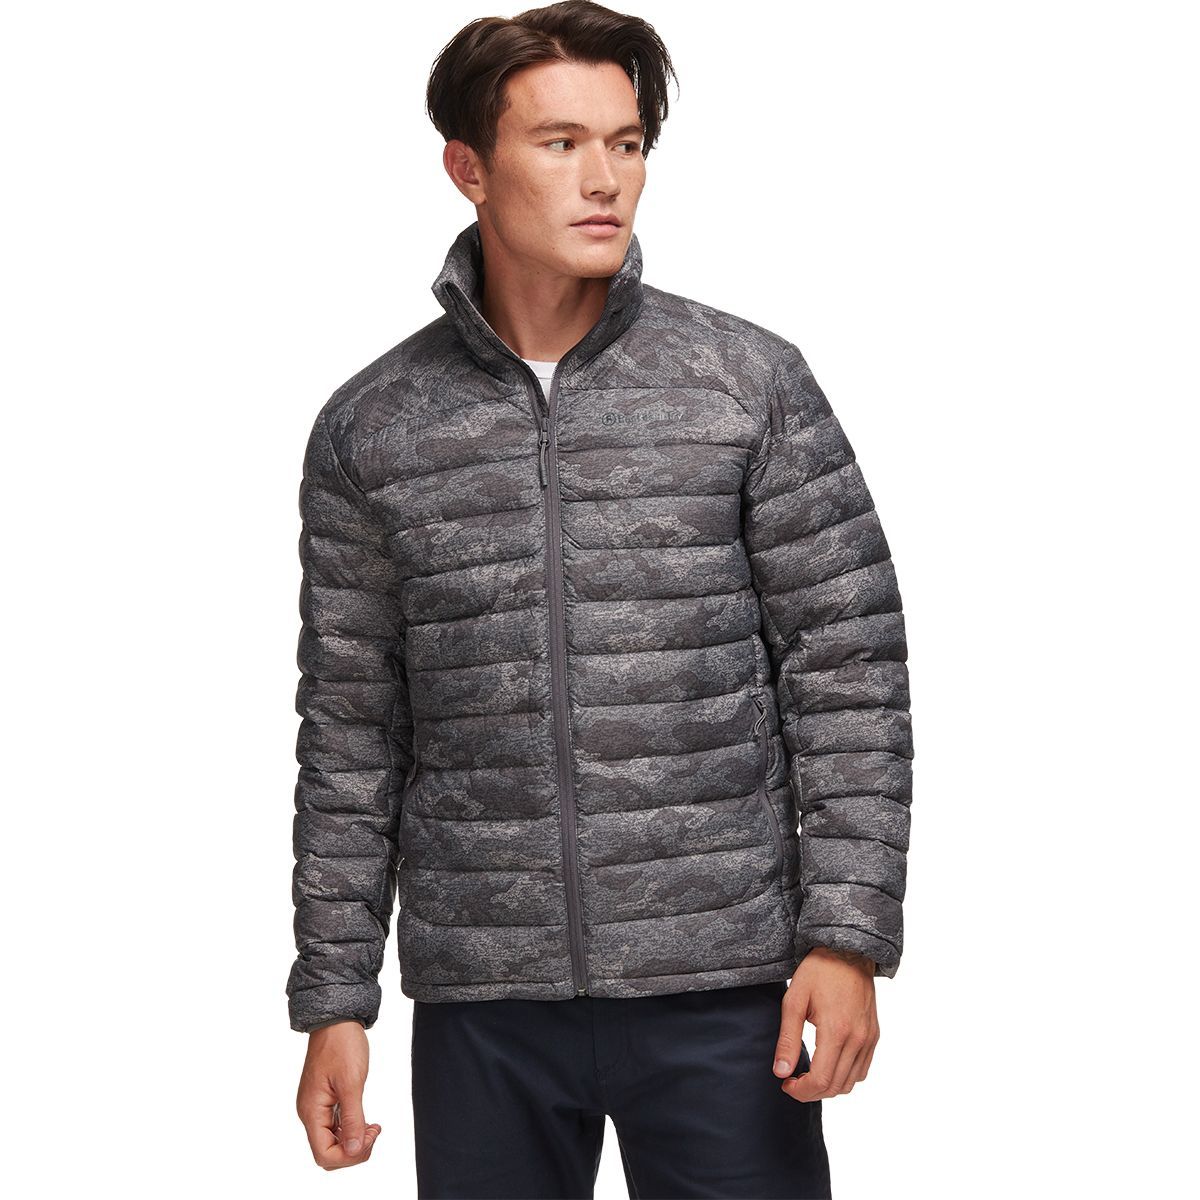 Backcountry Silver Fork 750 Down Jacket - Men's | Backcountry